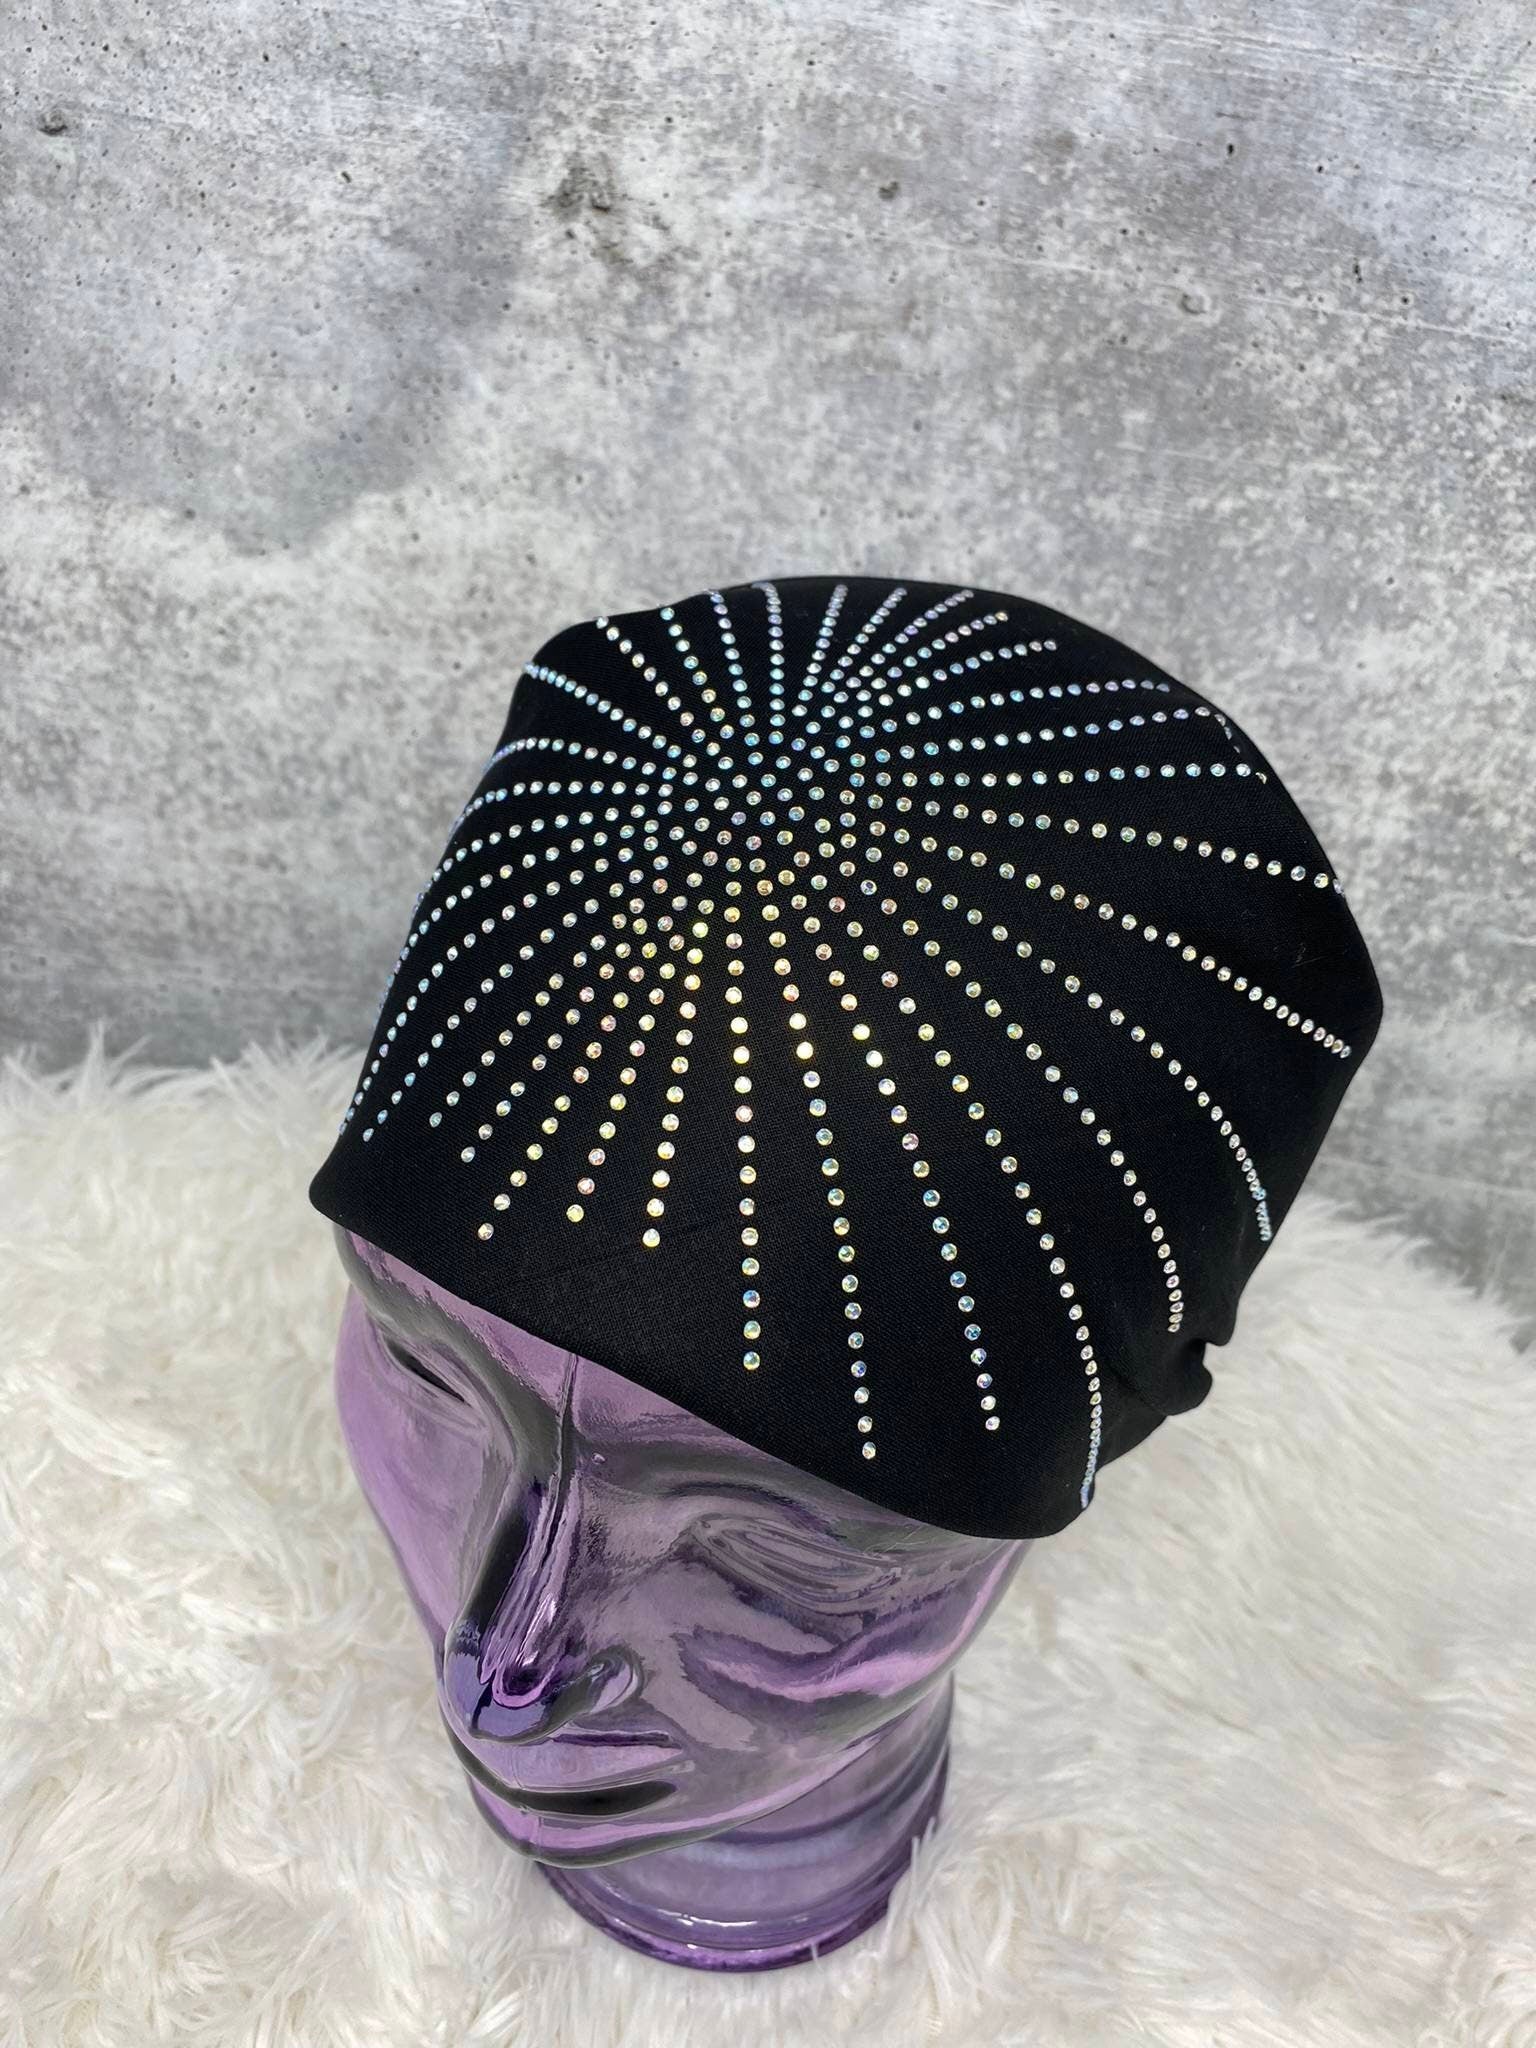 Sparkling Bursts, Handmade Bling Headscarf, Women's Bandana Accessories, Scarf for Bikers, Work-out, Bad Hair Day, Blinged Out Head Cover